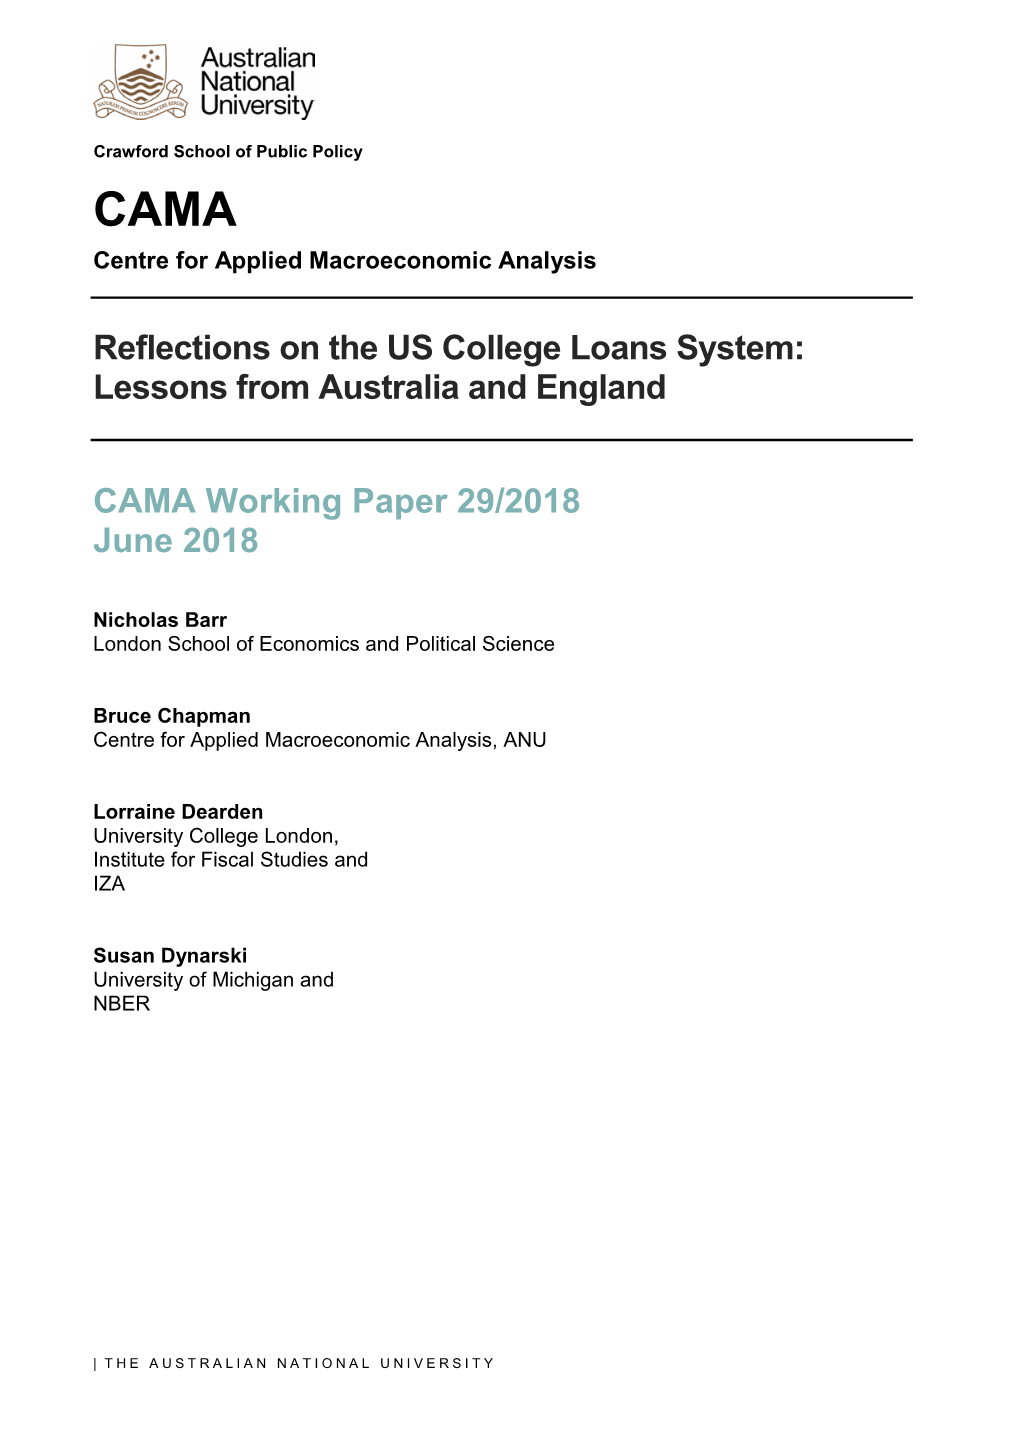 Reflections on the US College Loans System: Lessons from Australia and England